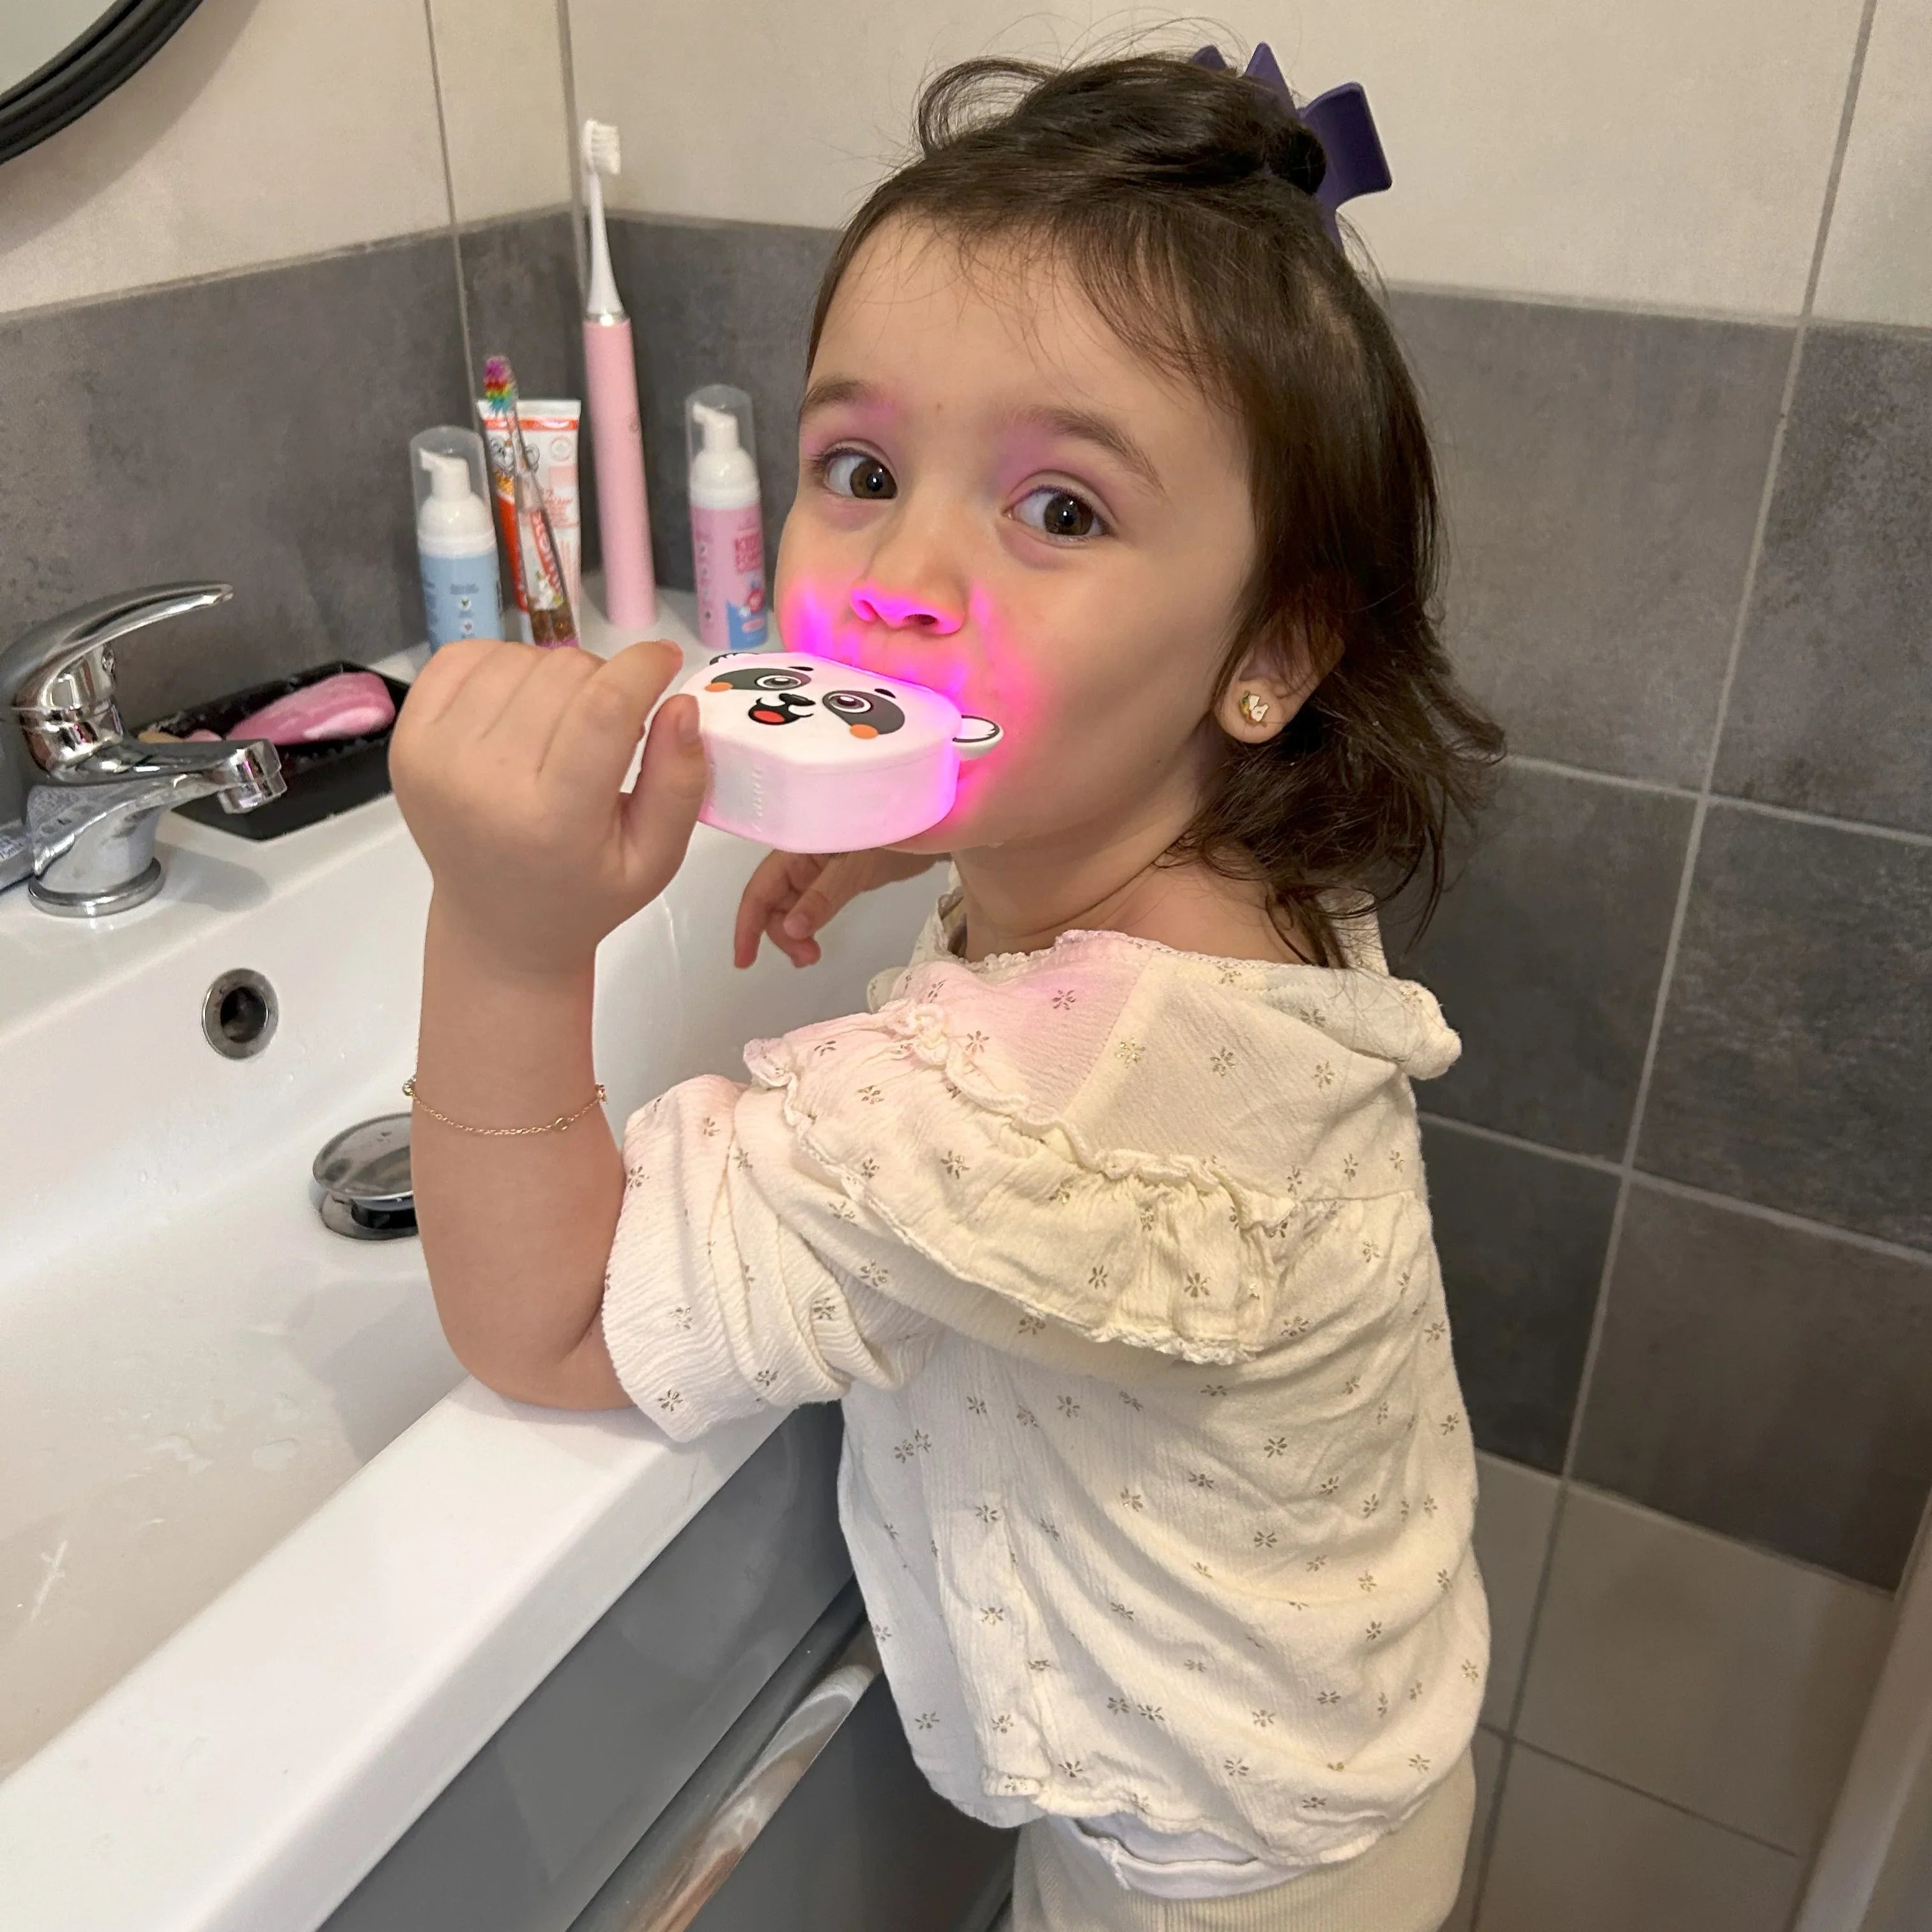 KiddoBrush – A new and effective way of brushing teeth